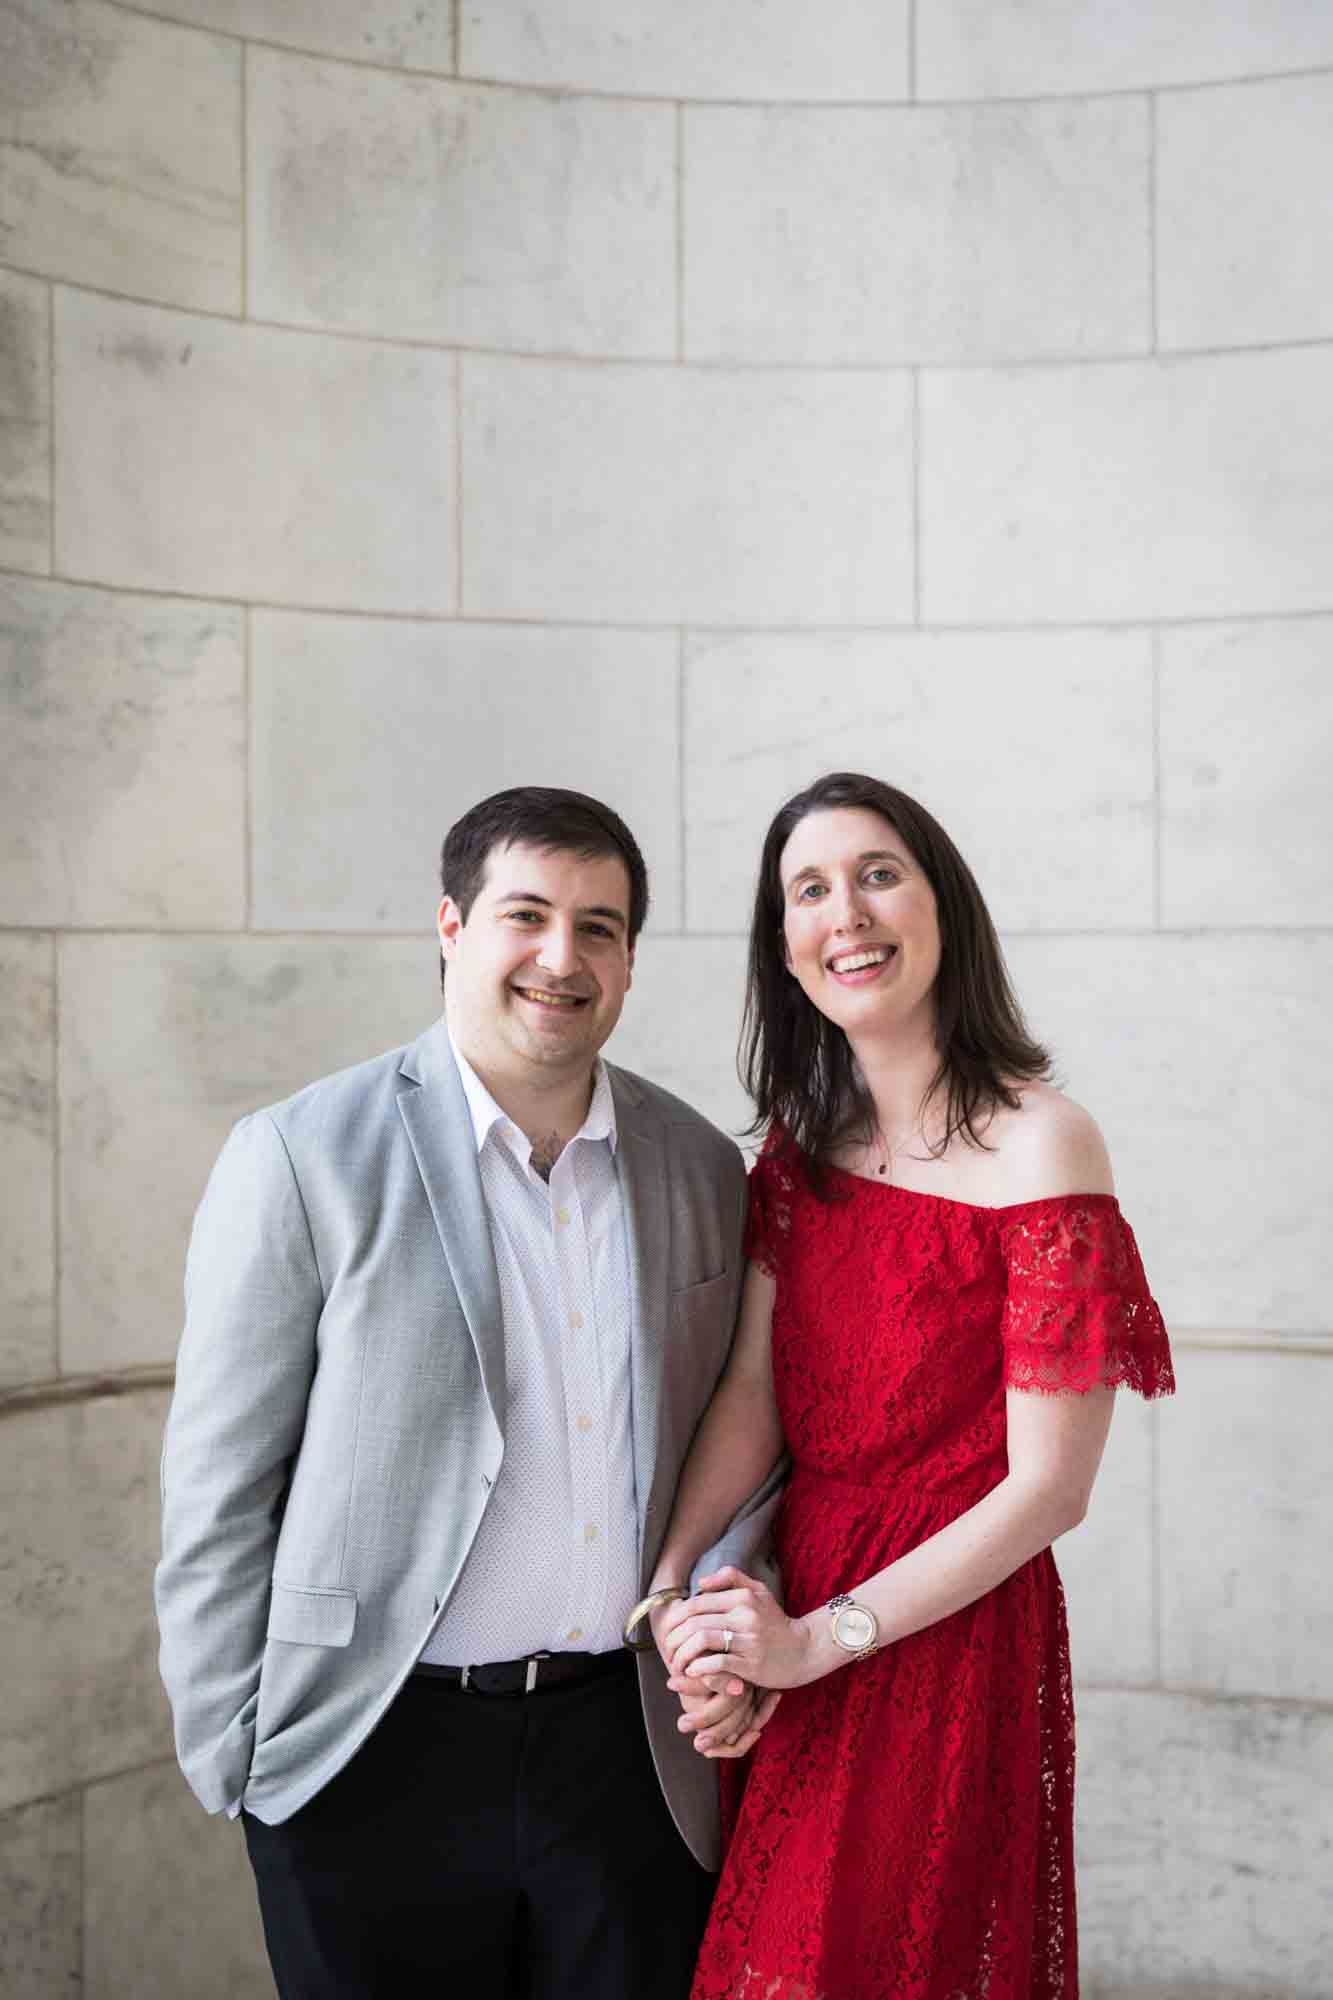 Man holding hands in marble alcove with woman wearing red dress during a New York Public Library surprise proposal